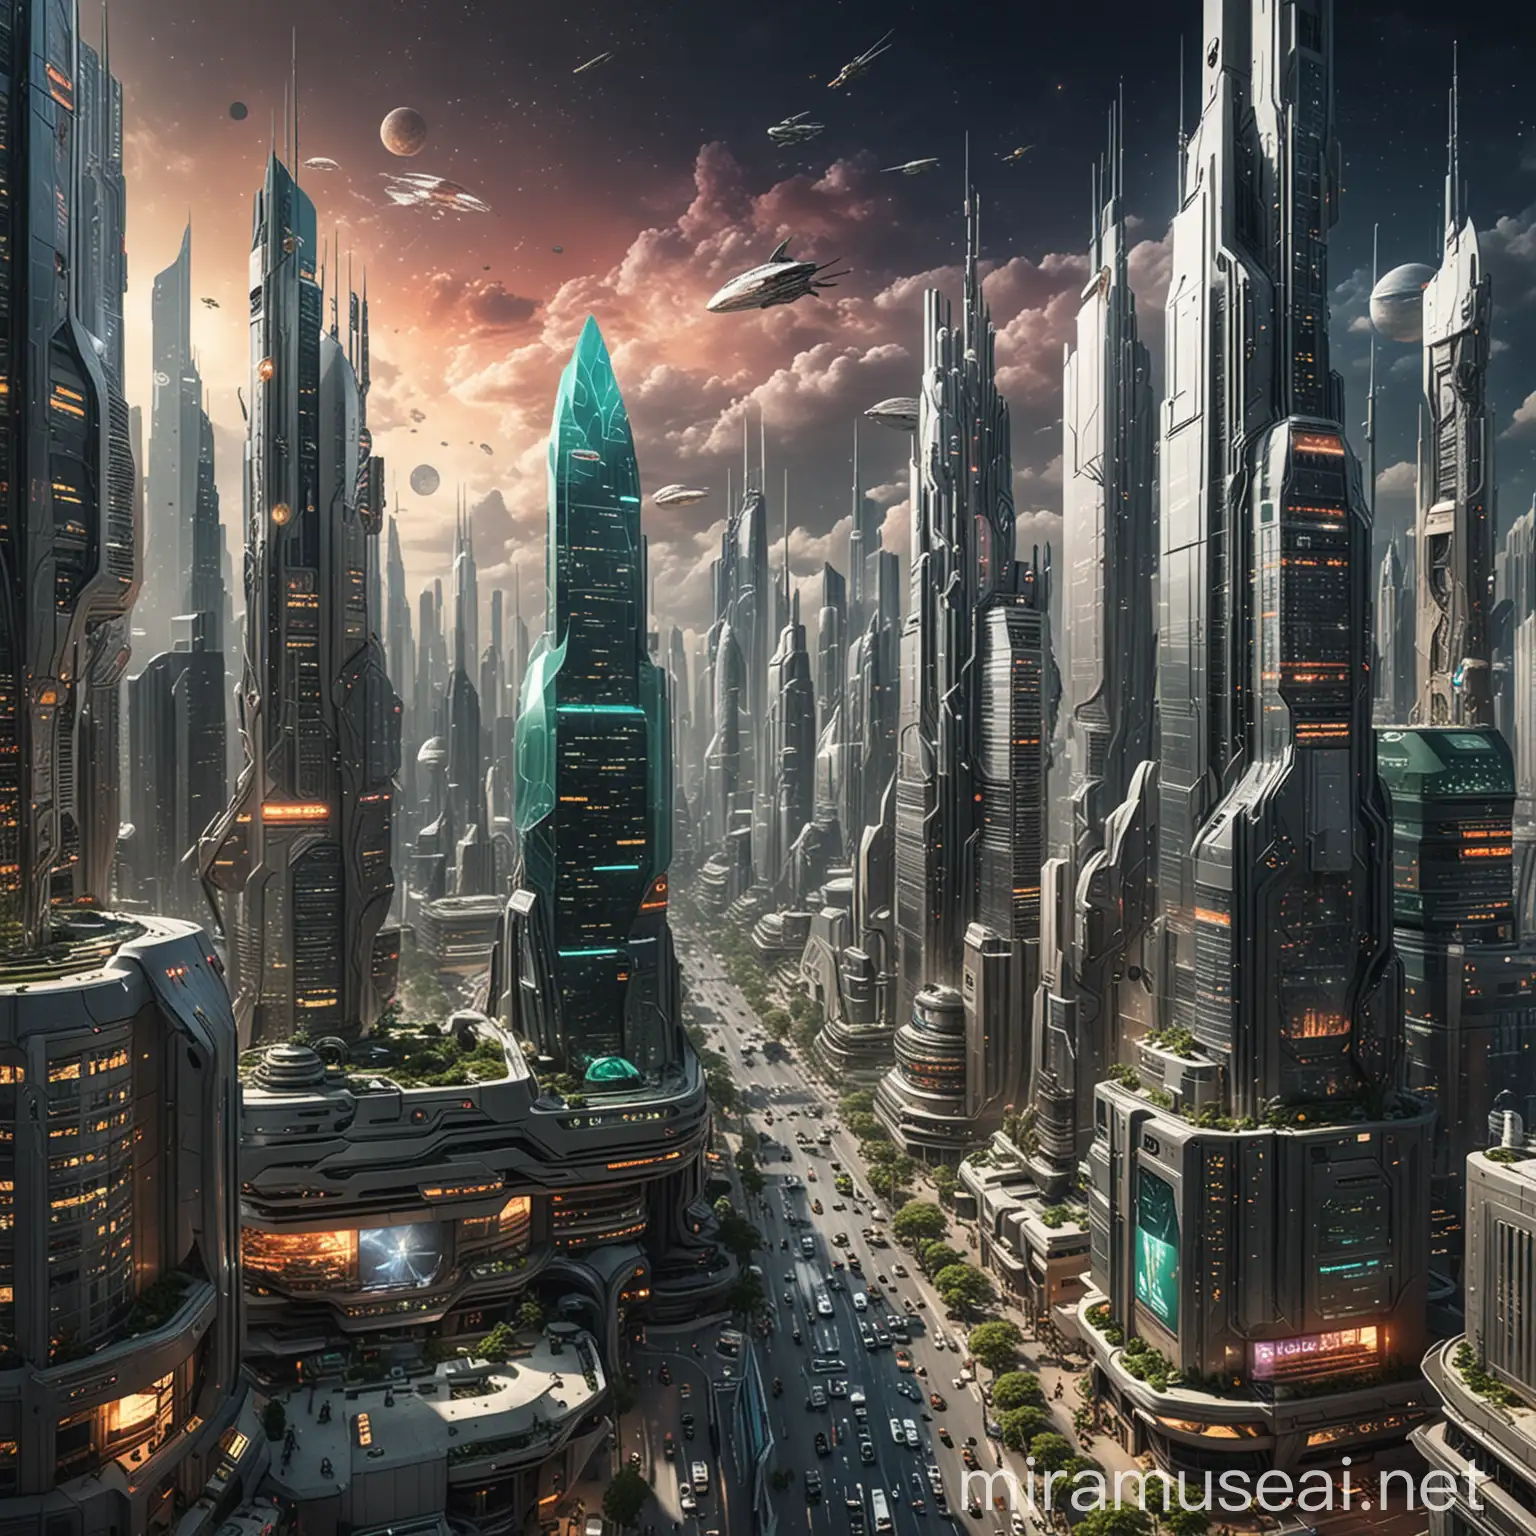 Futuristic Space Colony HighRise Buildings Offices and Holographic Advertisements